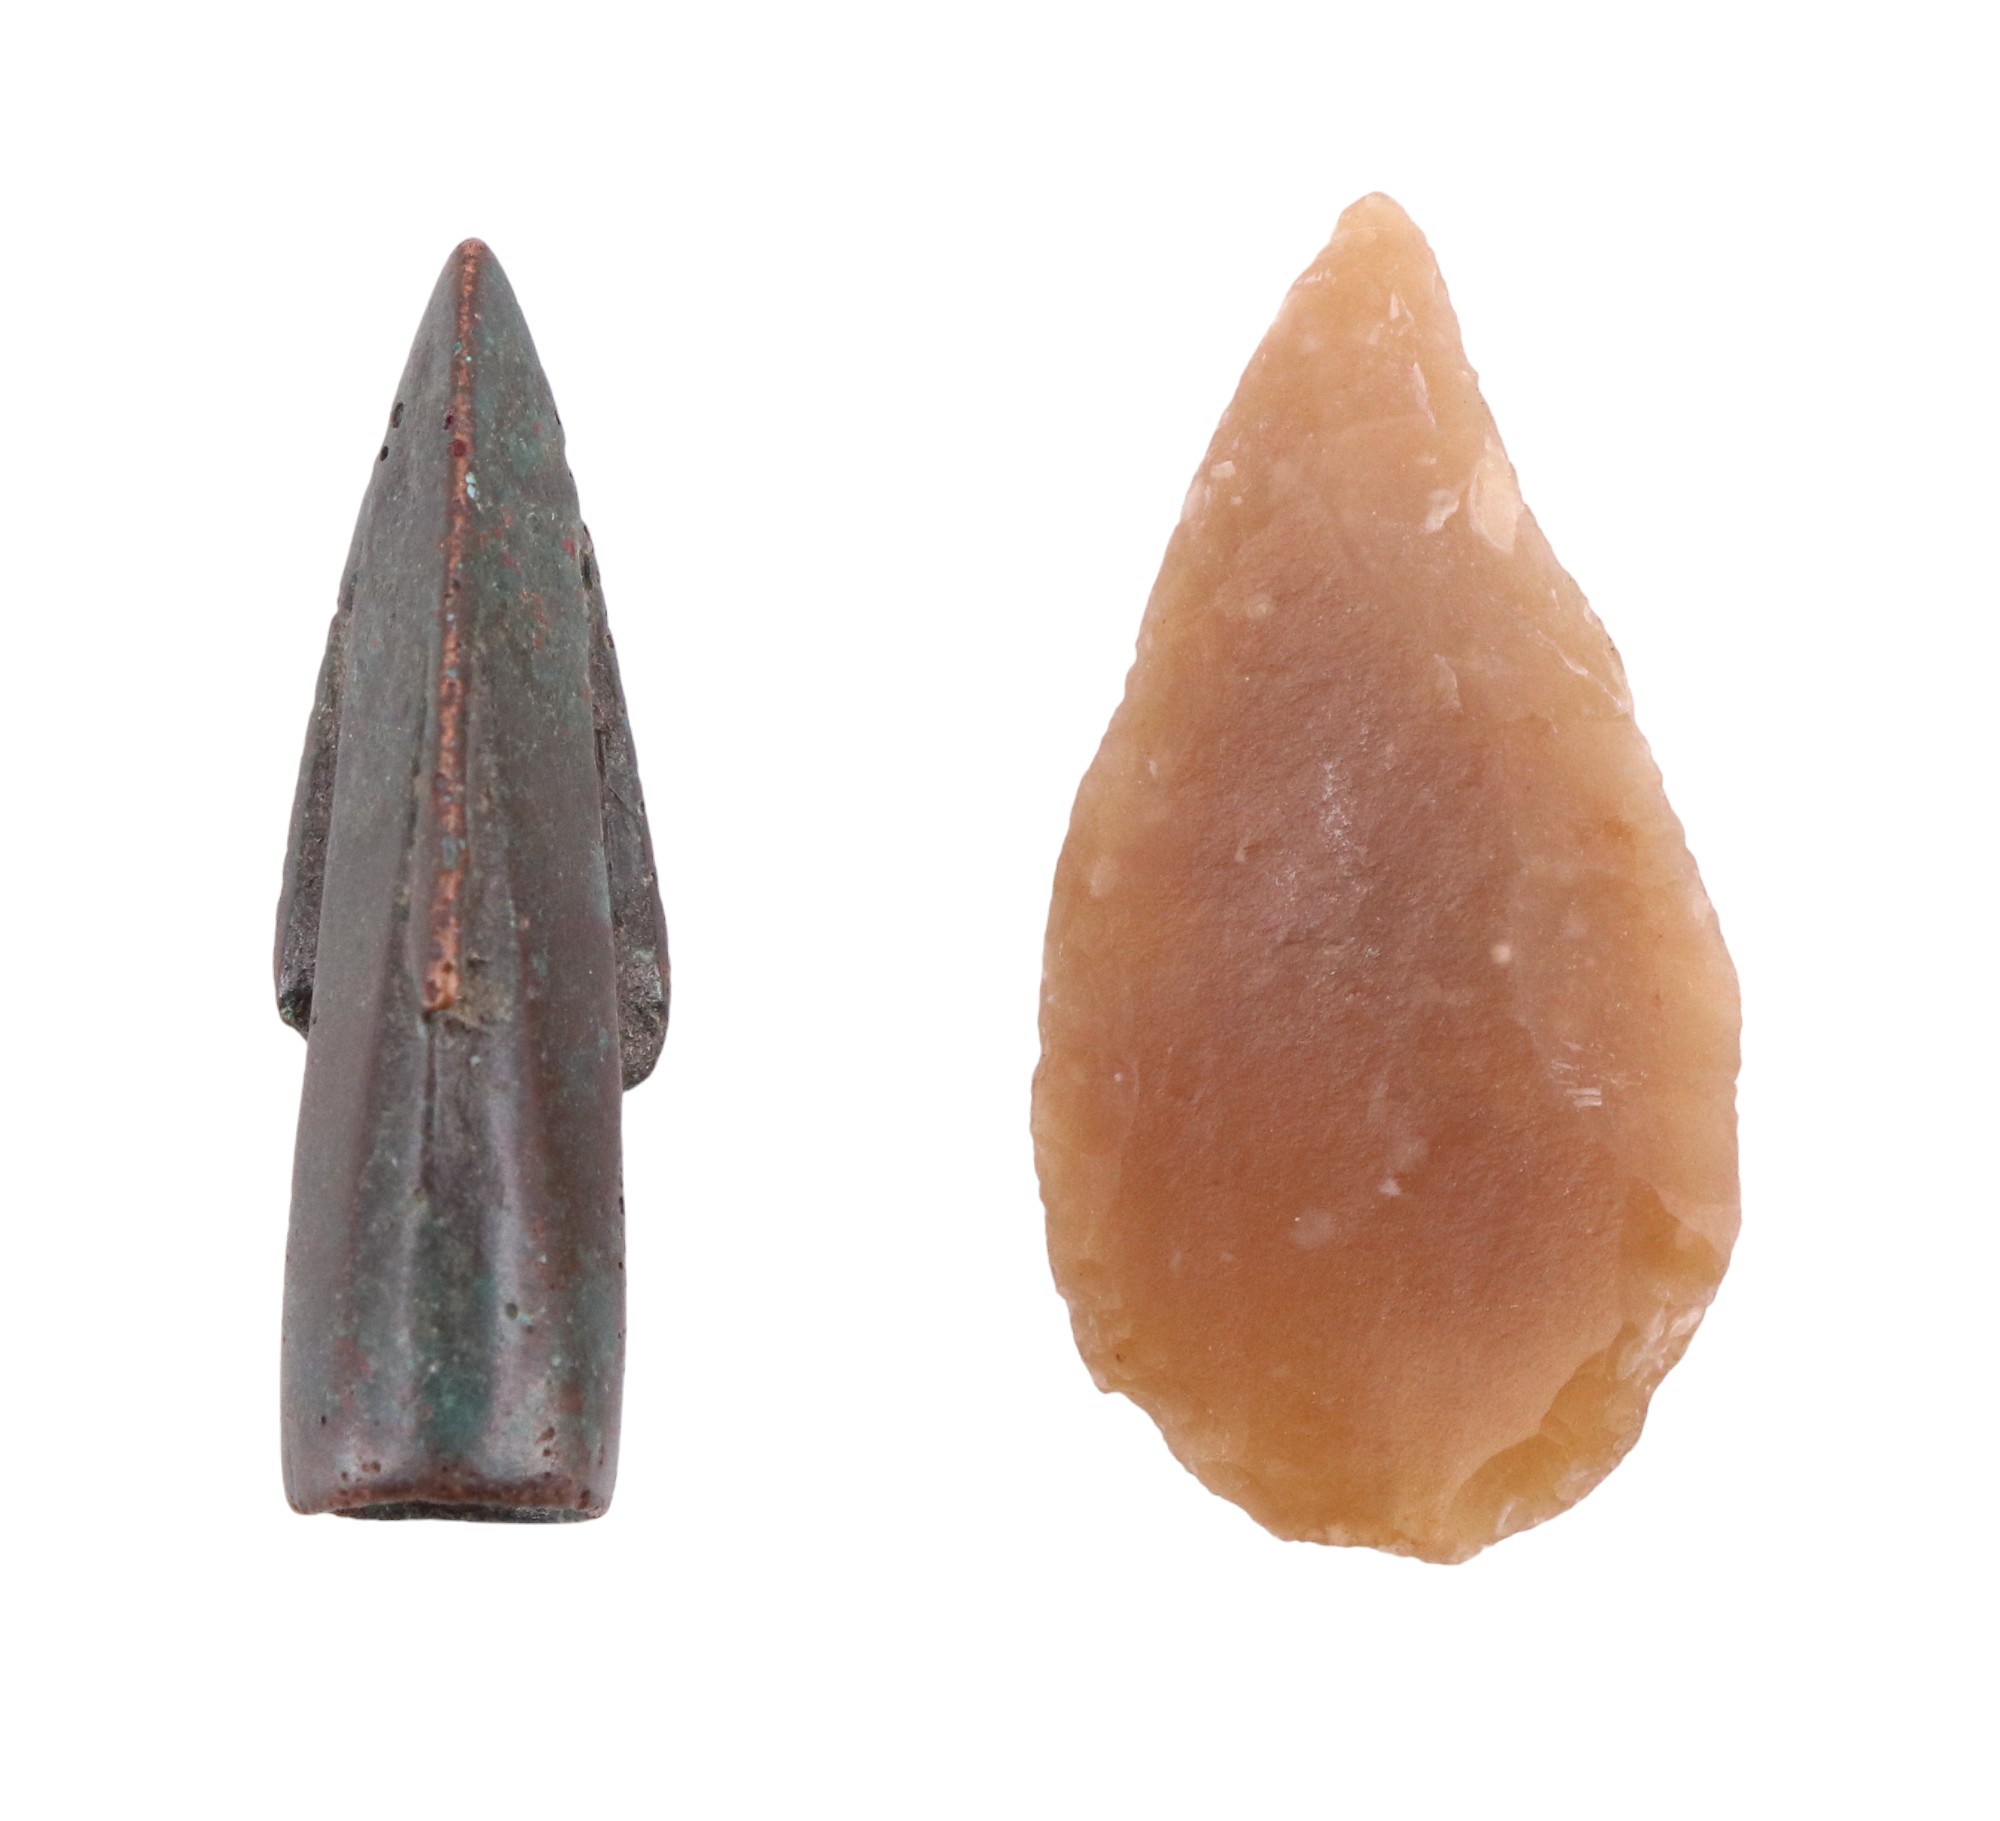 Roman bronze and Neolithic flint arrowheads, former 25 mm